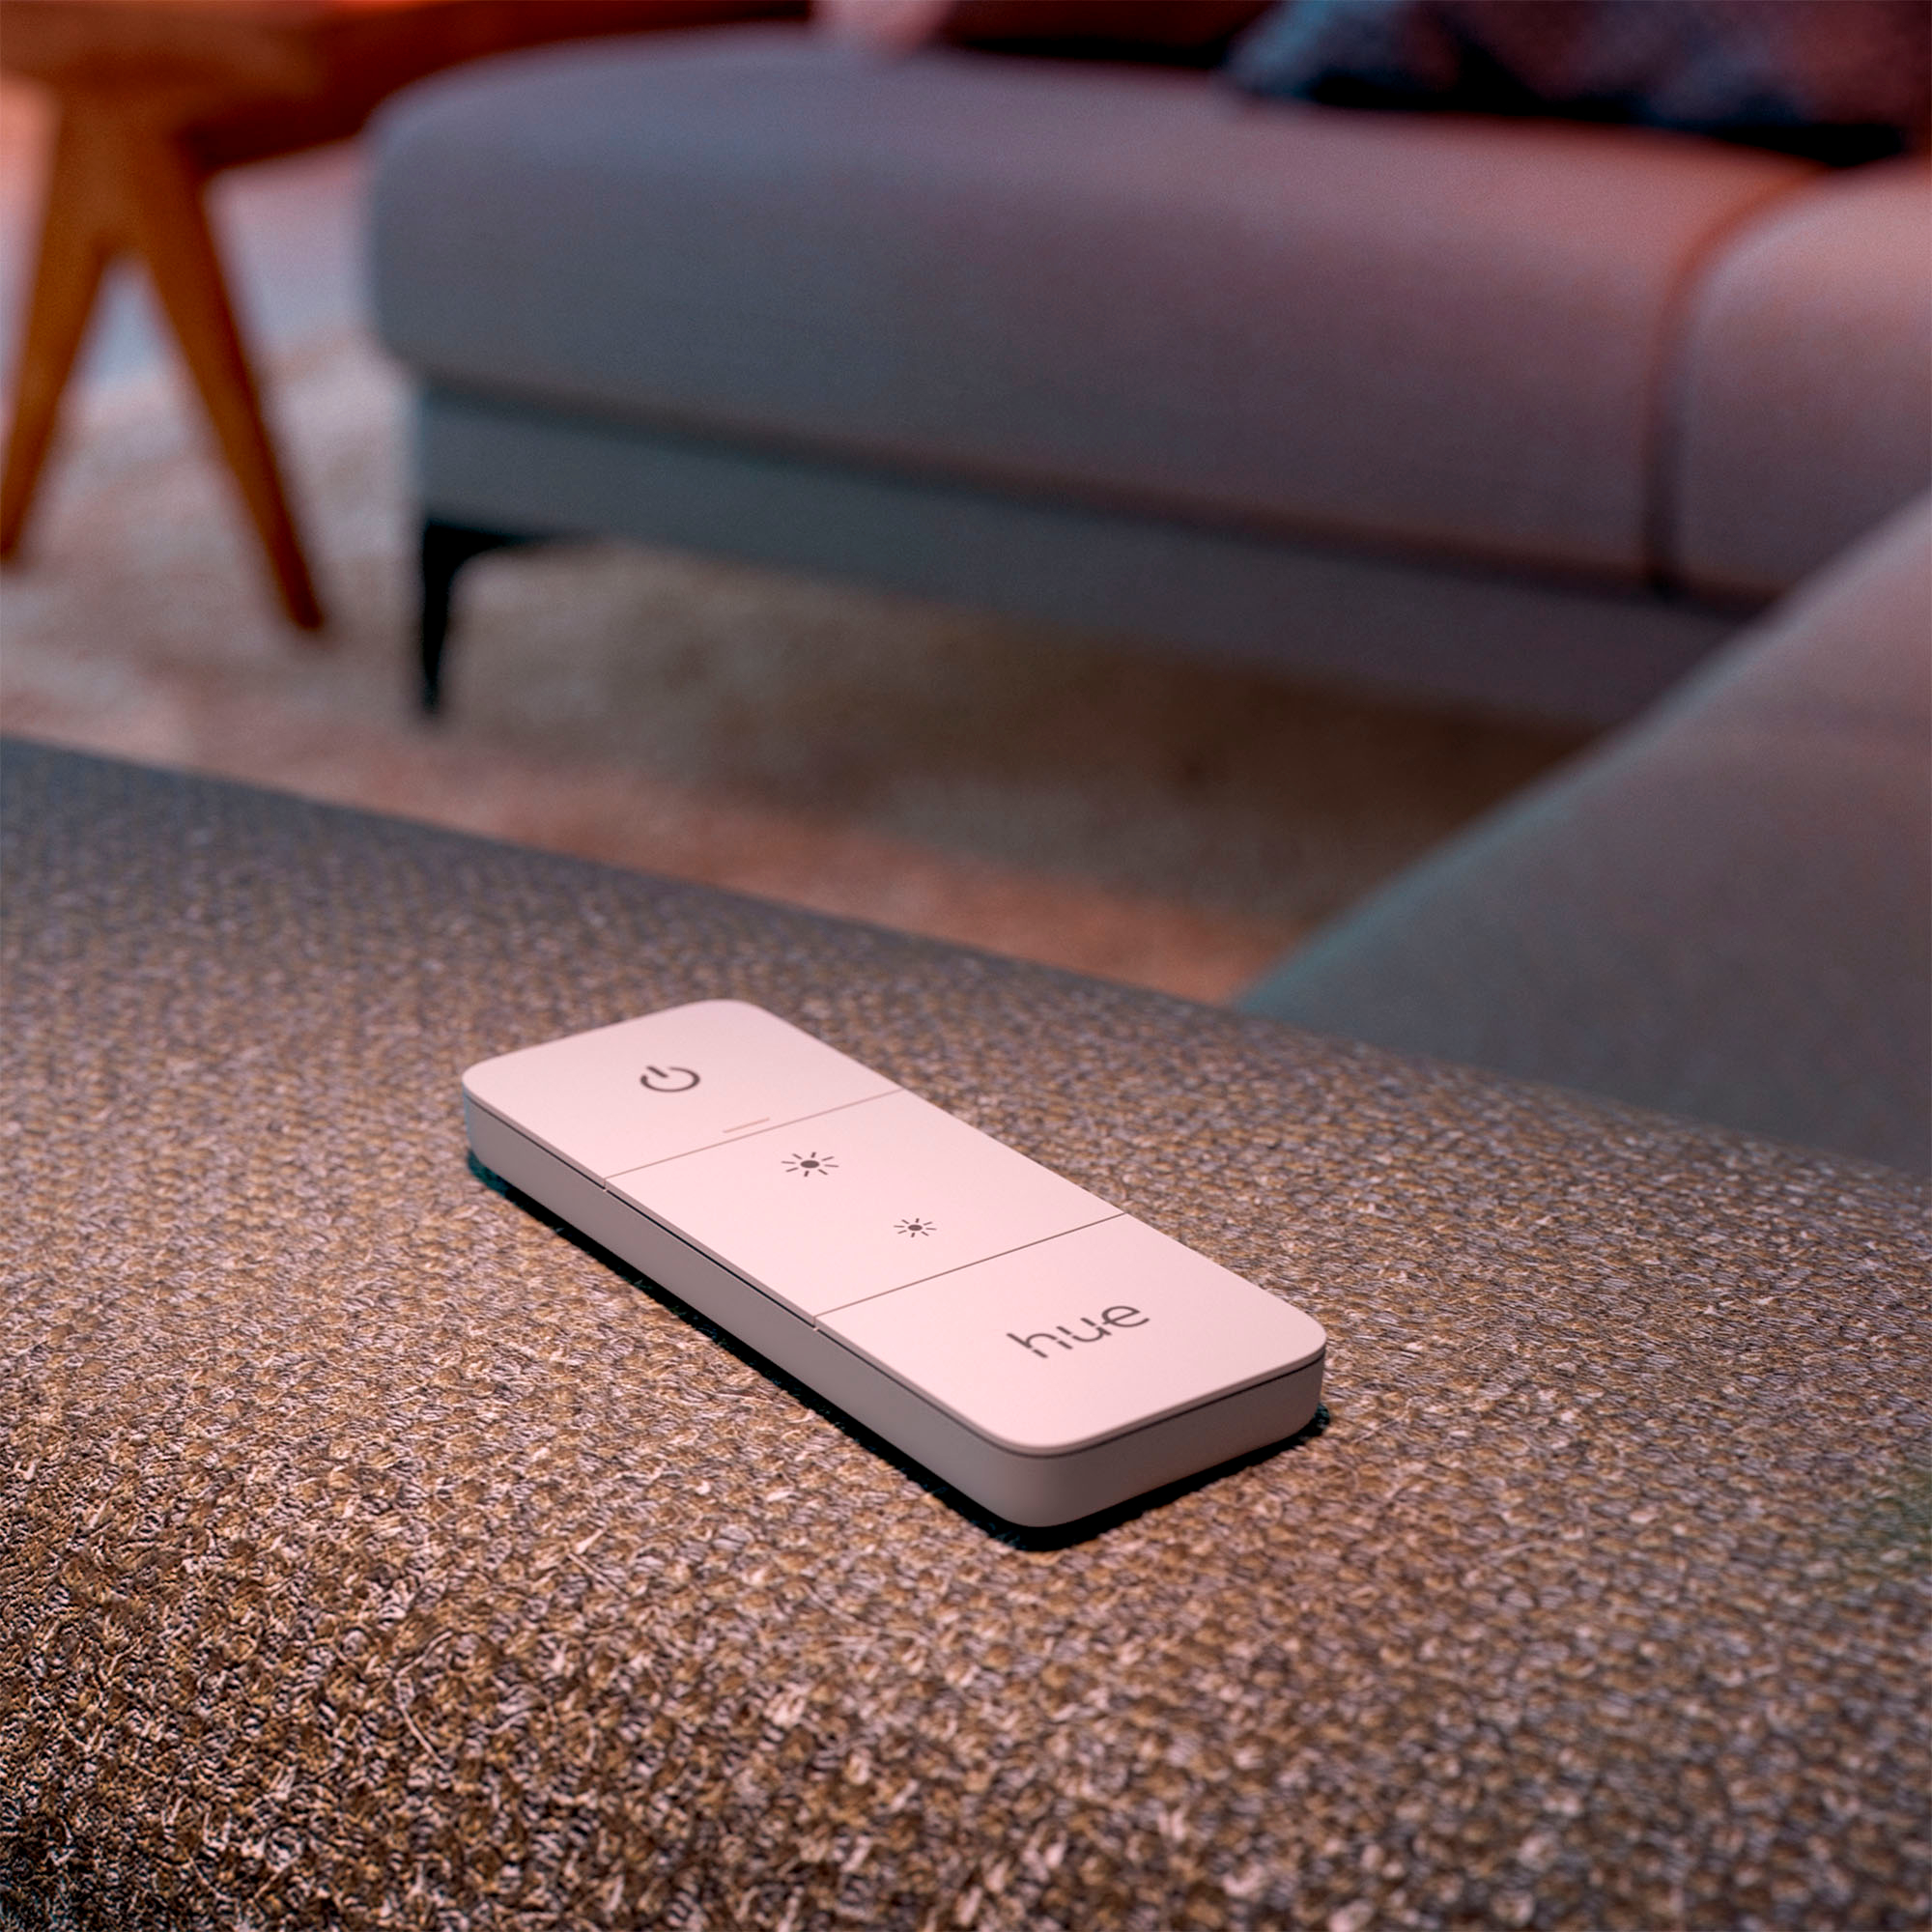 Installation-Free, Exclusive for Ph Philips Hue Smart Wireless Dimmer Switch V2 